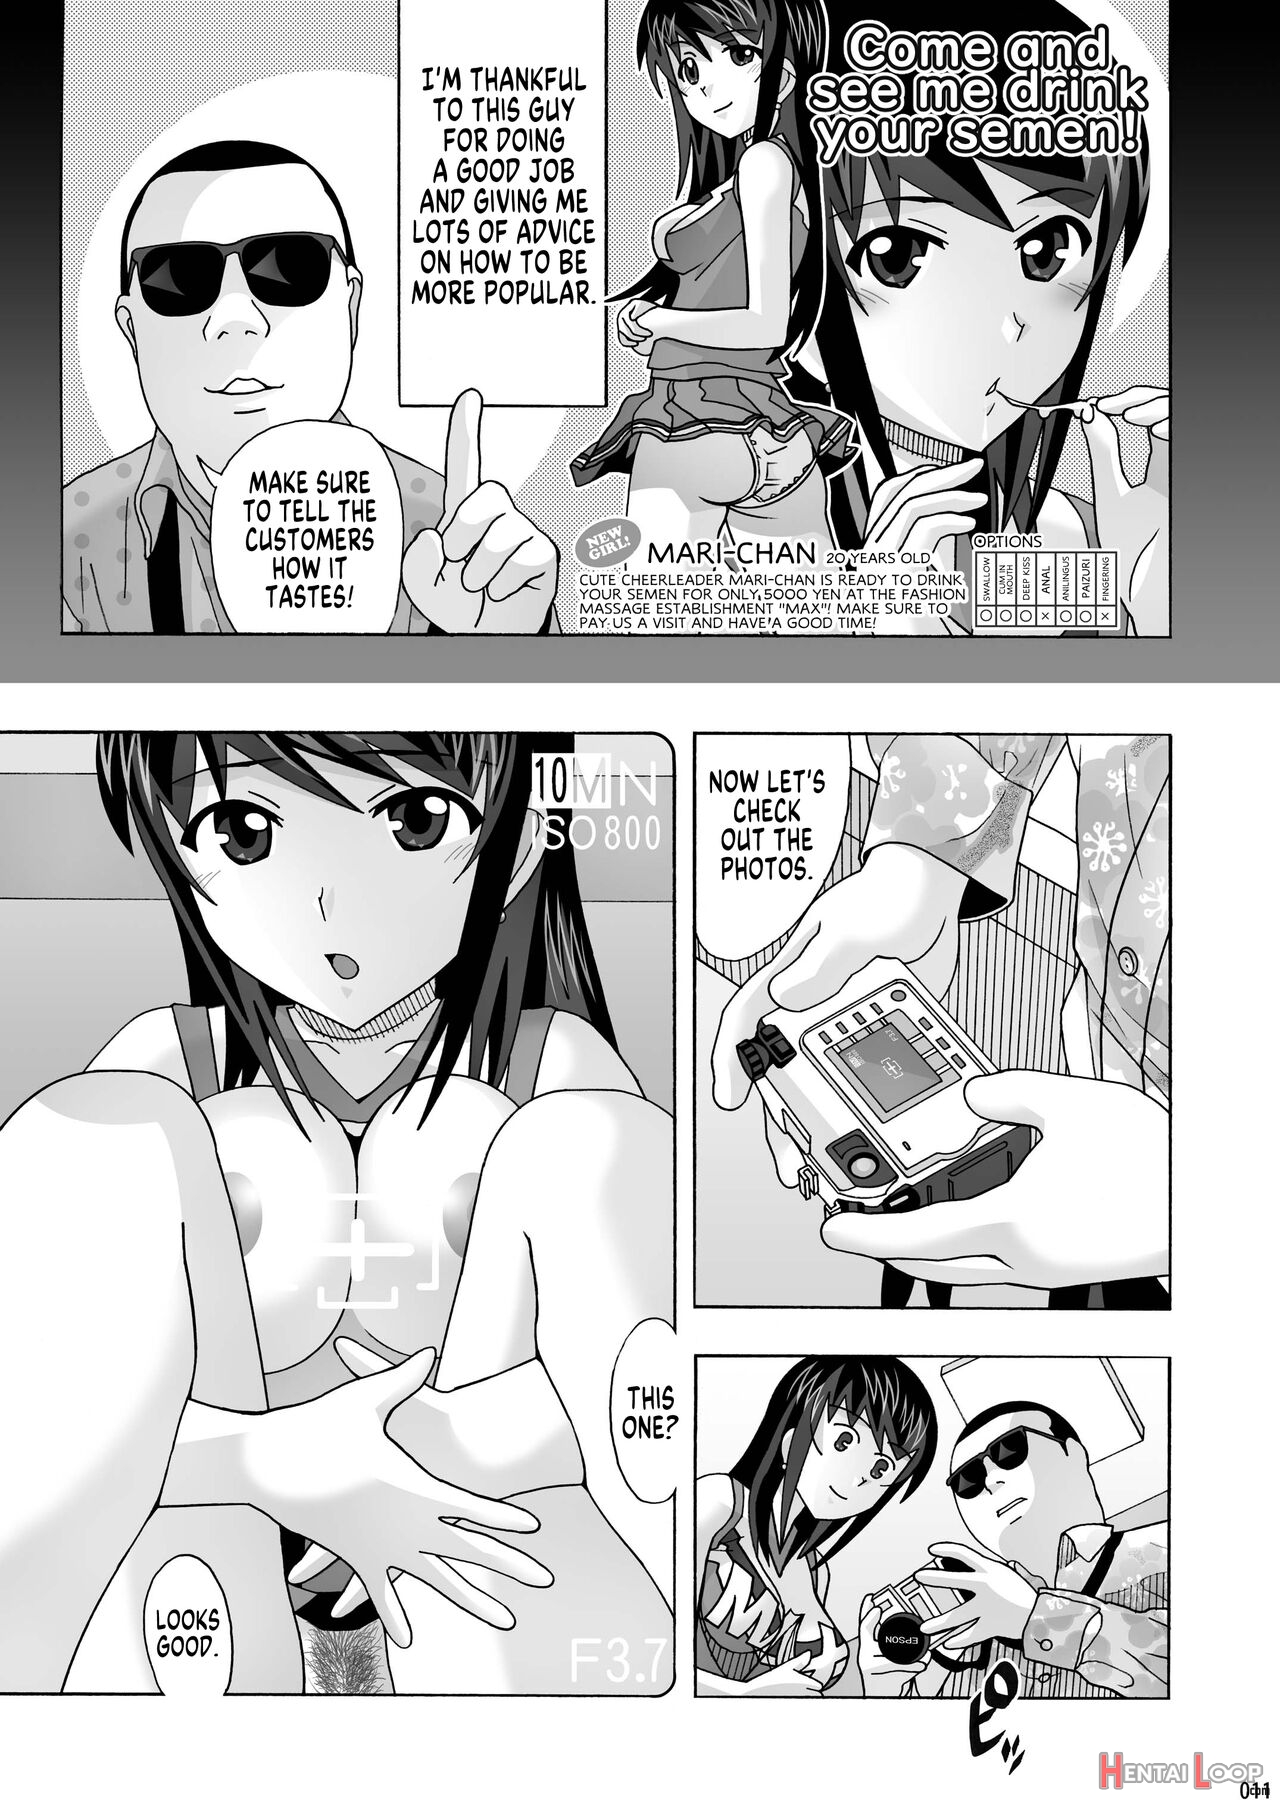 My Neighbor Is A Sex Worker Anthology 1 "fashion Massage Establishment" Ch.1-2 page 10